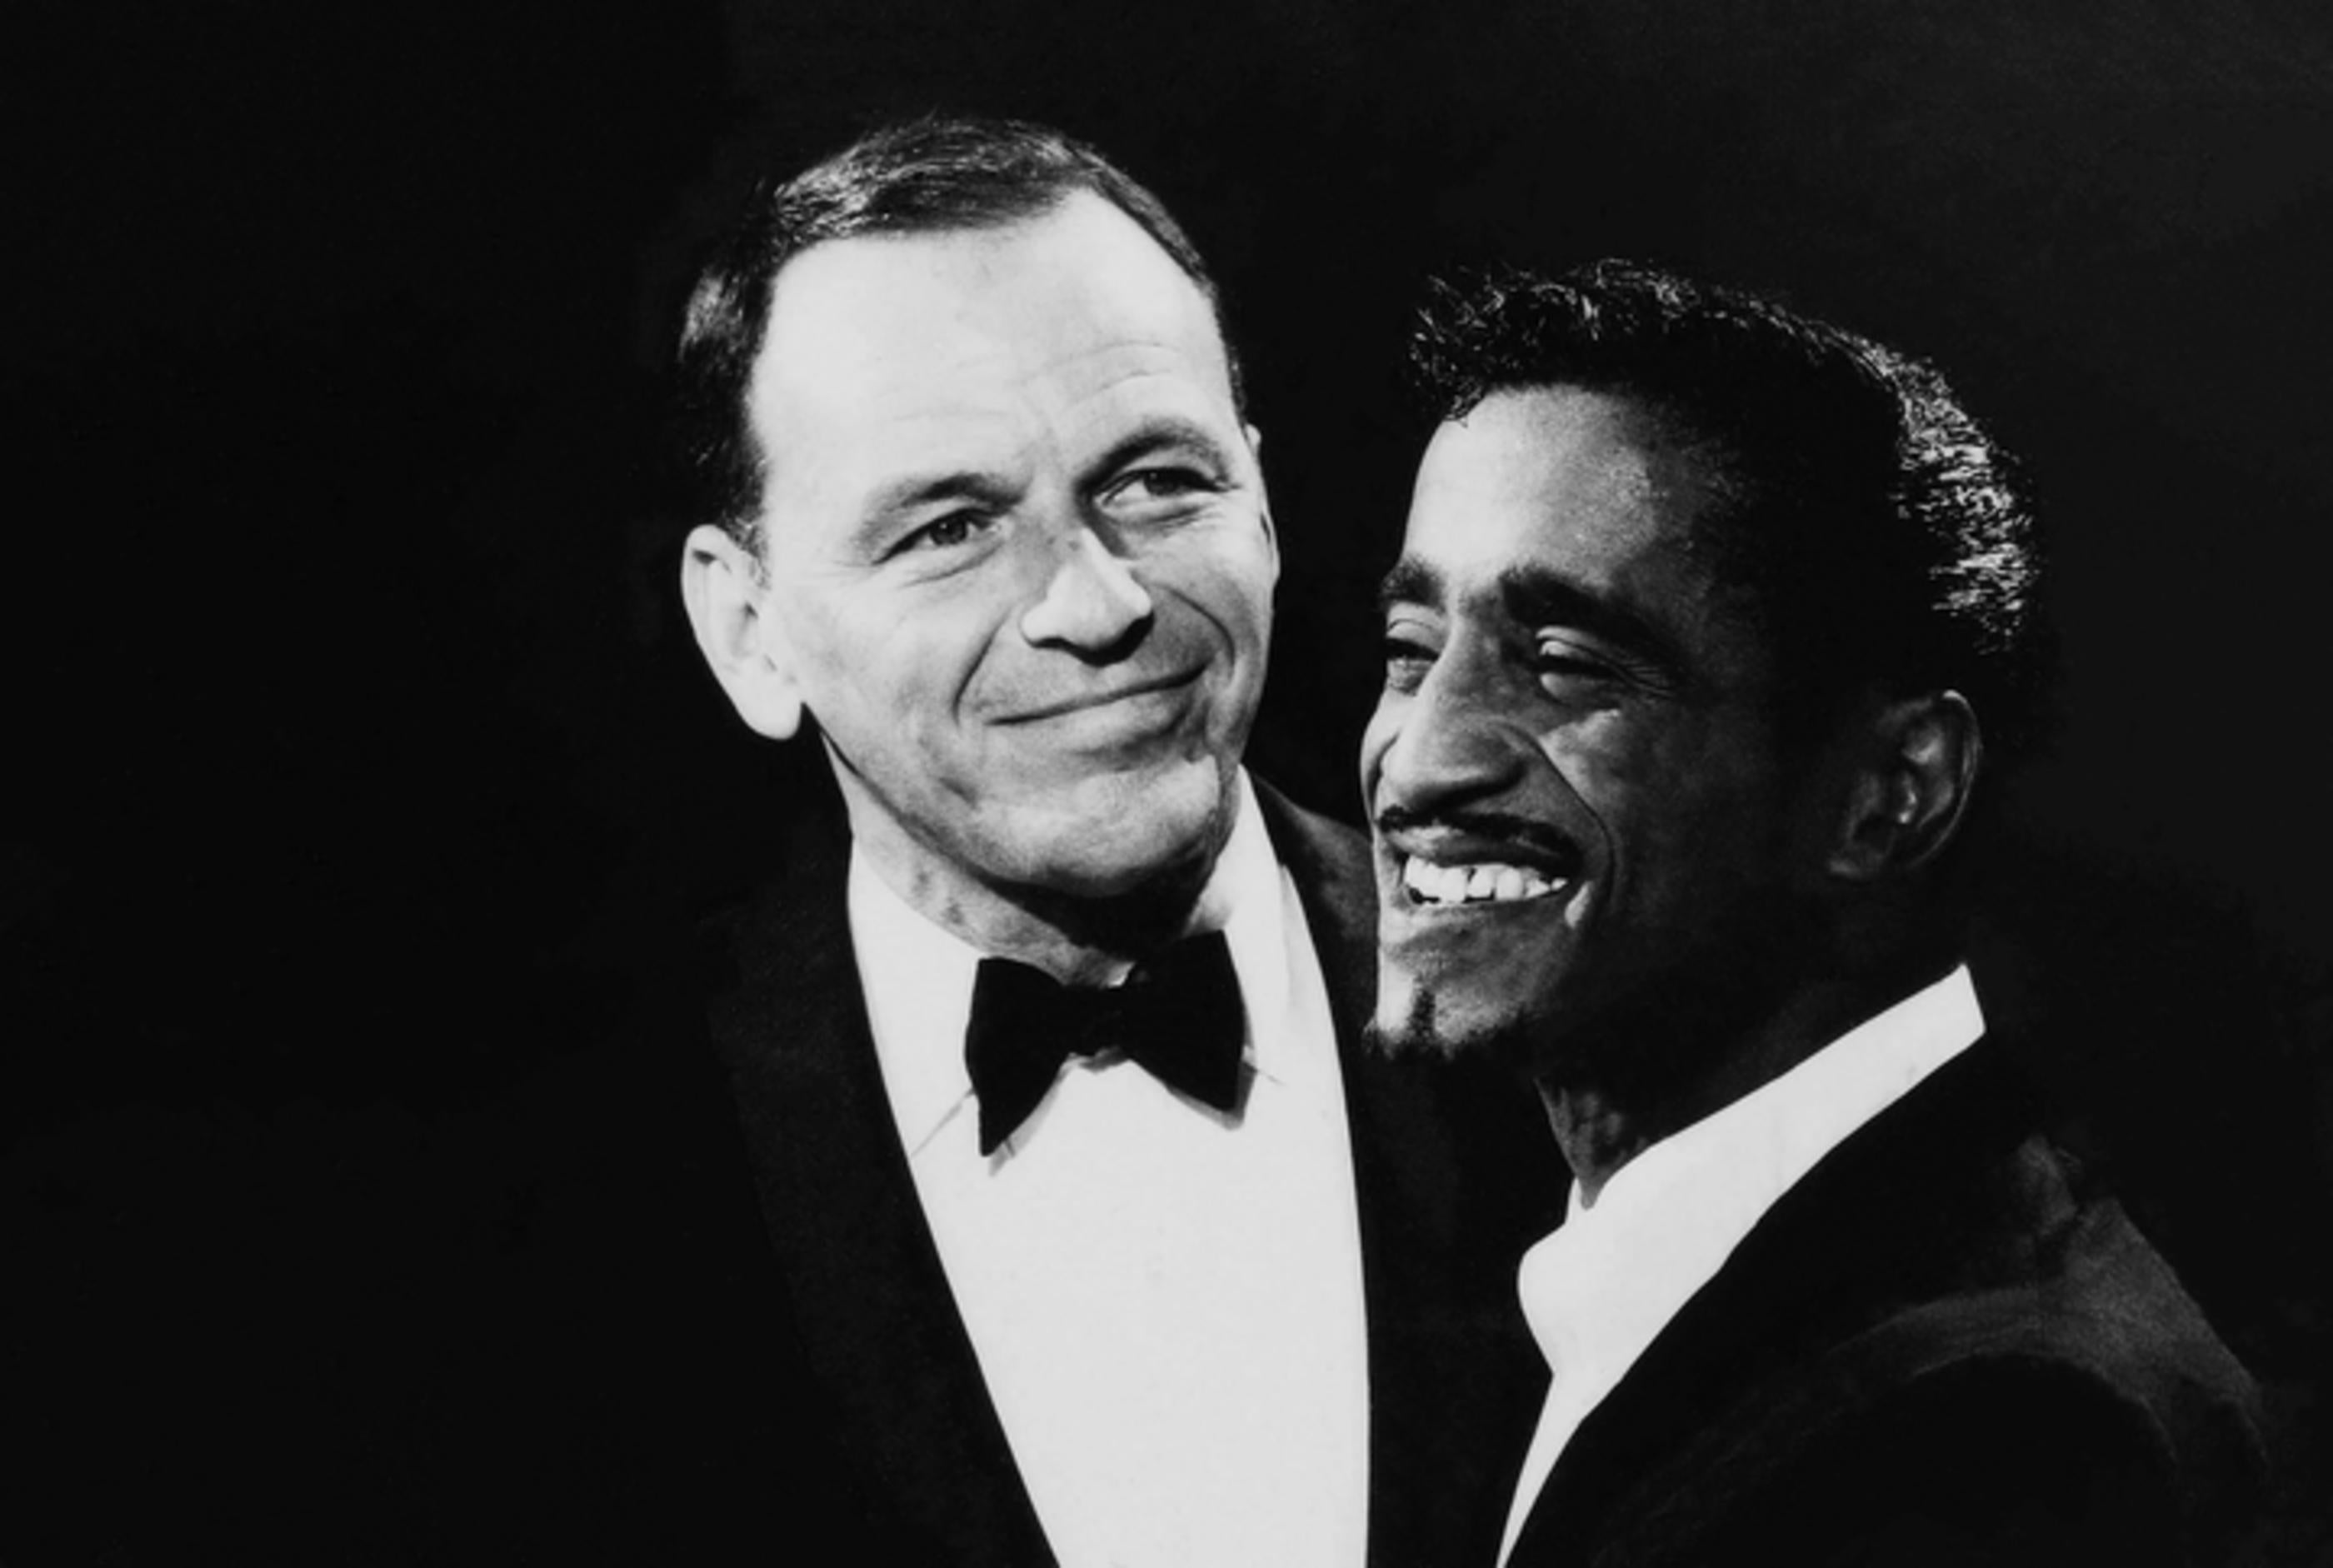 Unknown Black and White Photograph - Frank Sinatra and Sammy Davis Jr. Smiling